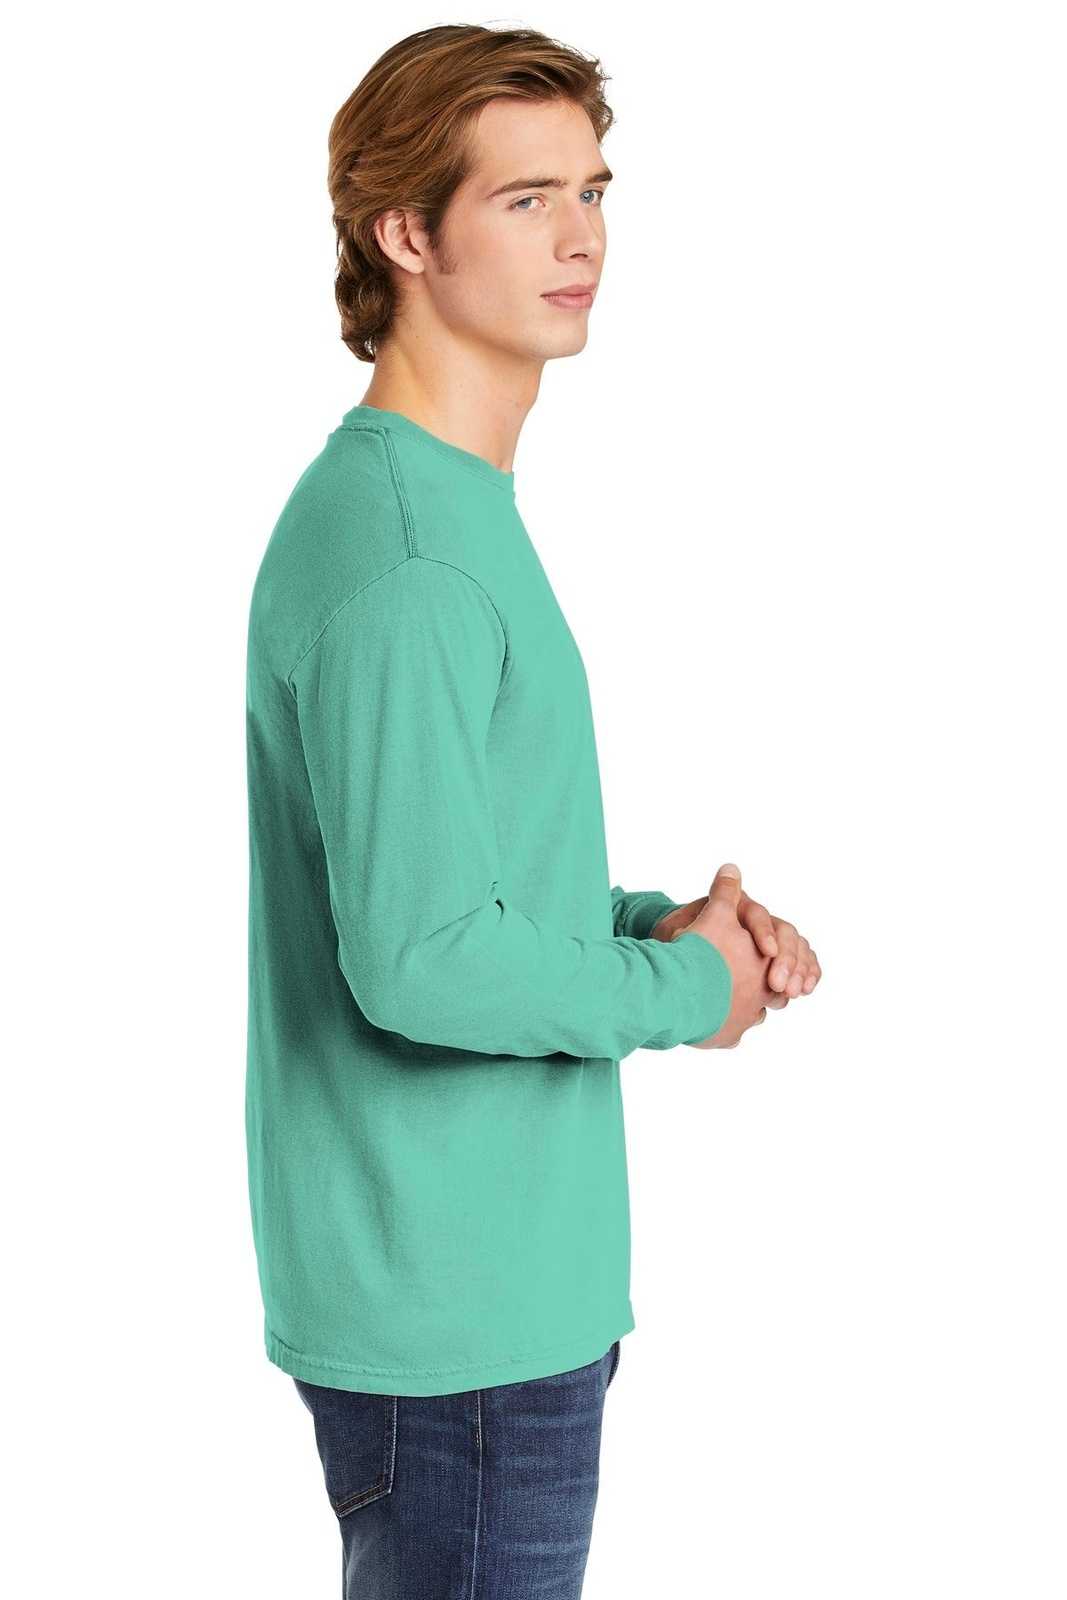 Comfort Colors 6014 Heavyweight Ring Spun Long Sleeve Tee - Chalky Mint - HIT a Double